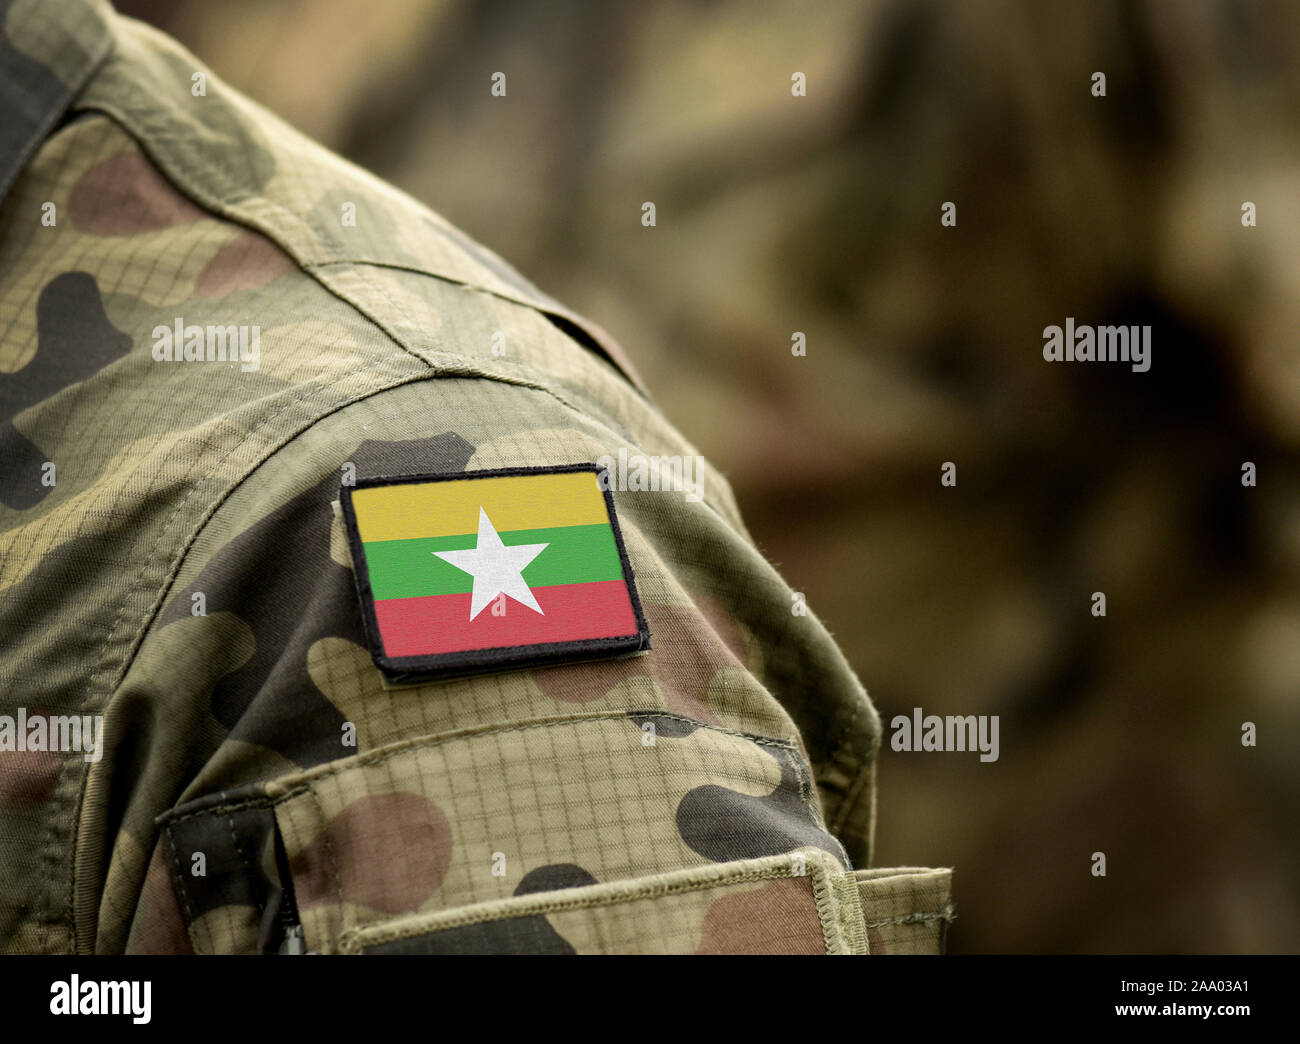 Flag of Myanmar and also known as Burma on military uniform. Army, armed forces, soldiers. Collage. Stock Photo